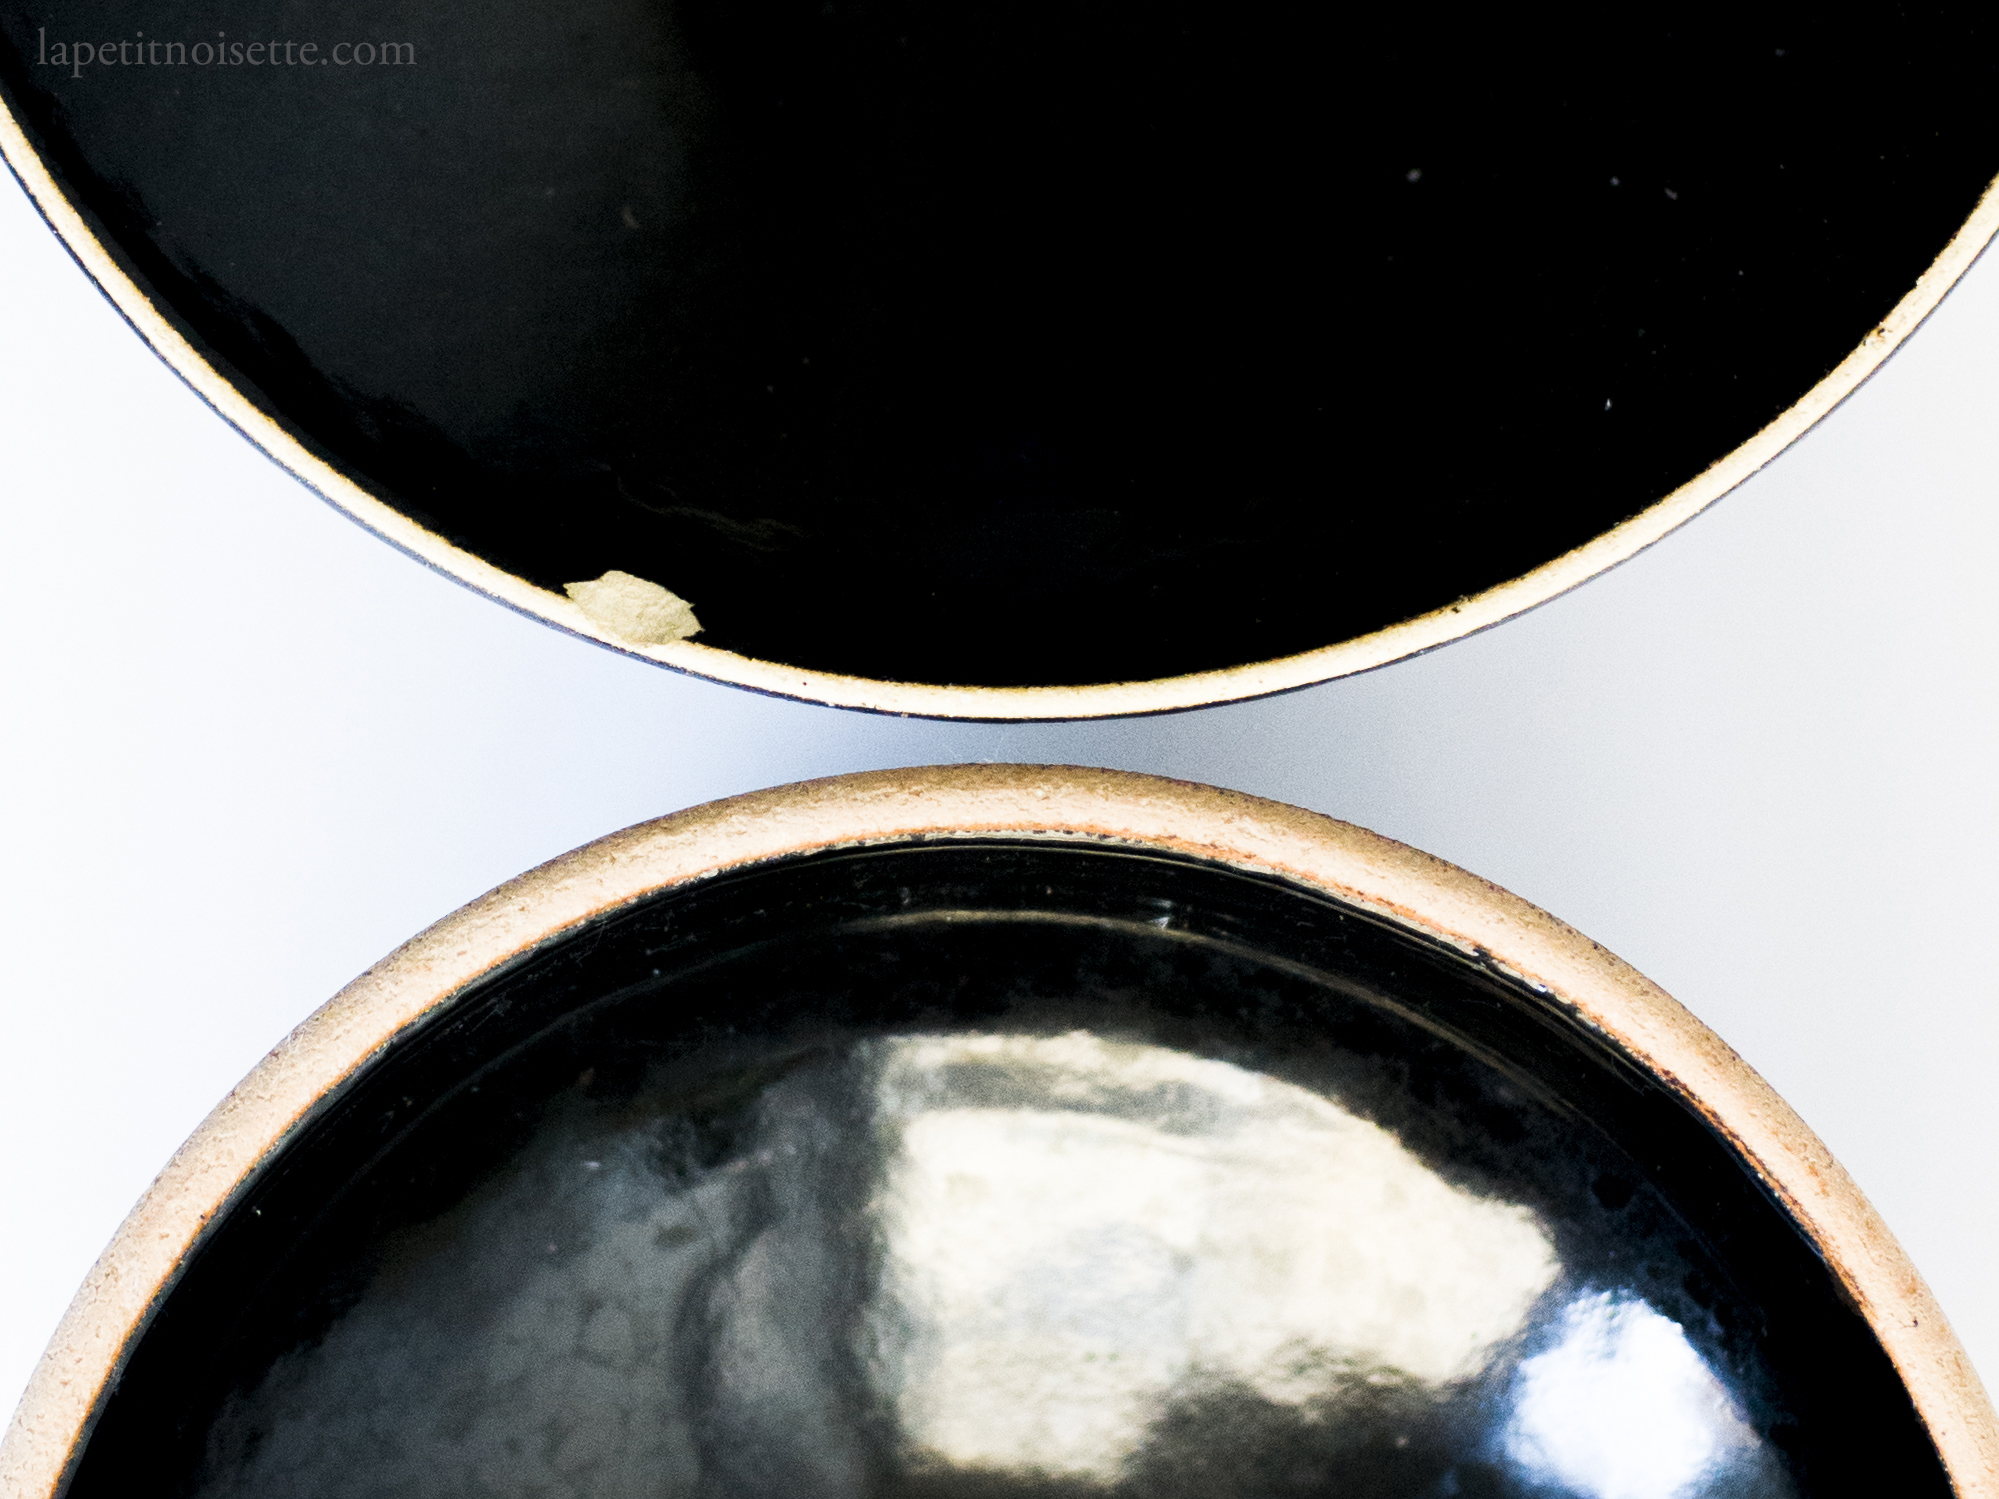 A side by side comparison of Kobo kiln's and Nagatanien's donabe outer lids showing how kobo kiln's are better made.